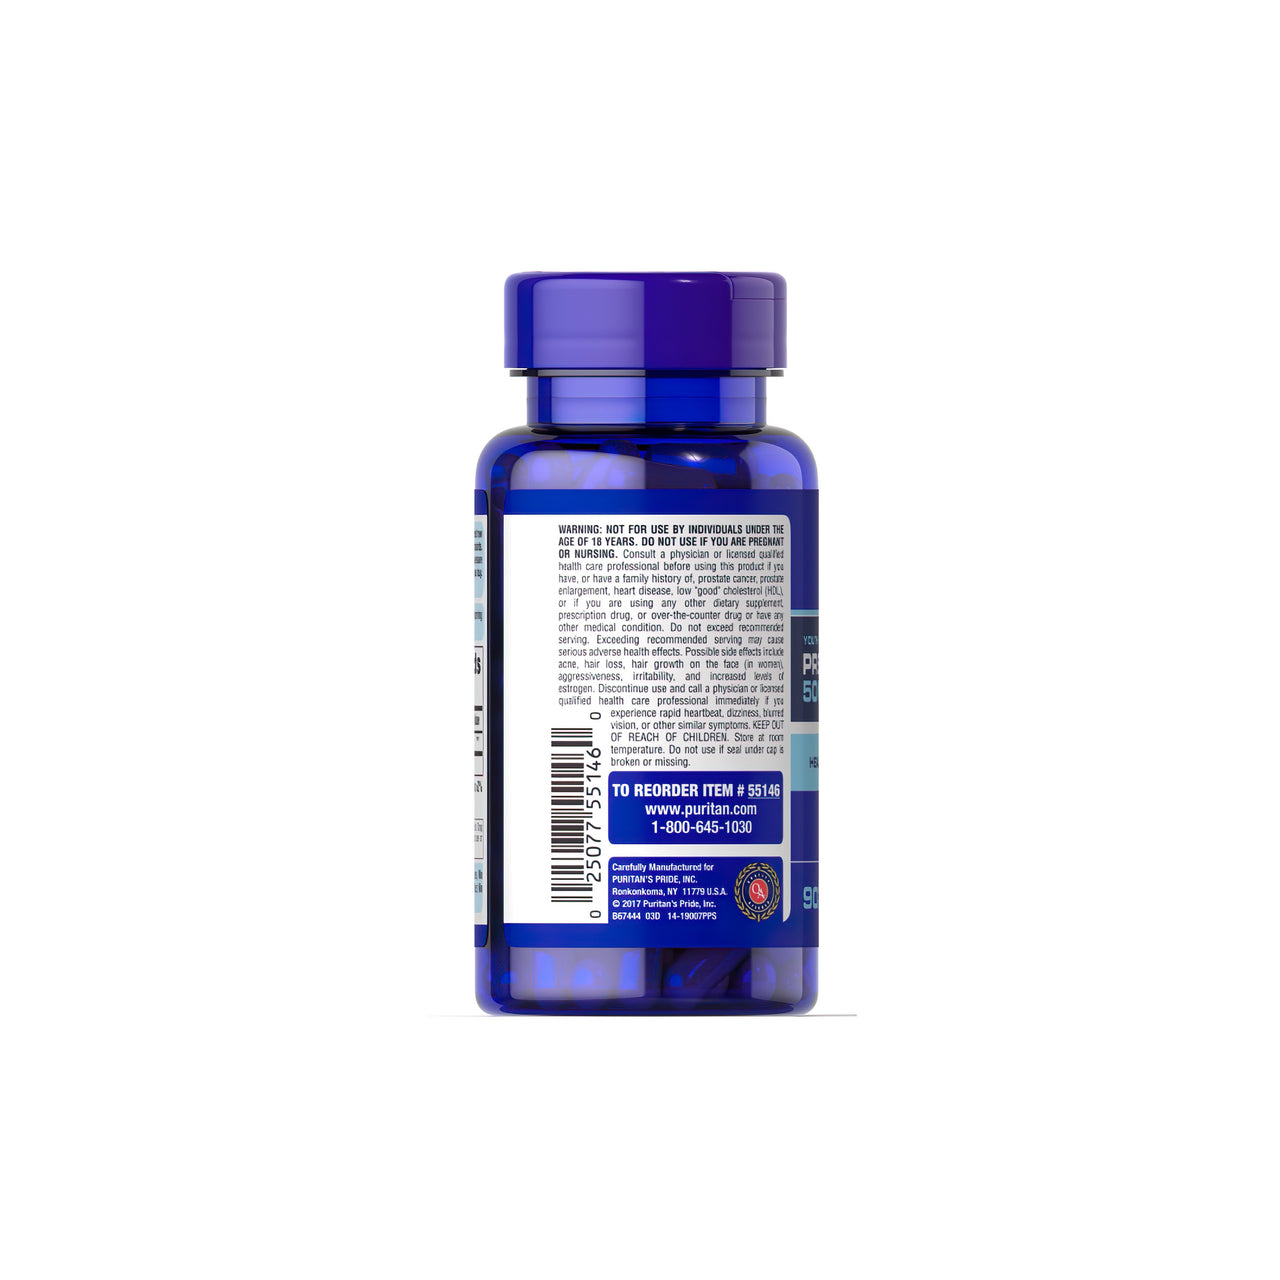 The back of a blue bottle with a label on it featuring the keywords "healthy aging" and "aging regimen" is the Pregnenolone 50 mg 90 Rapid Release Capsules from Puritan's Pride.